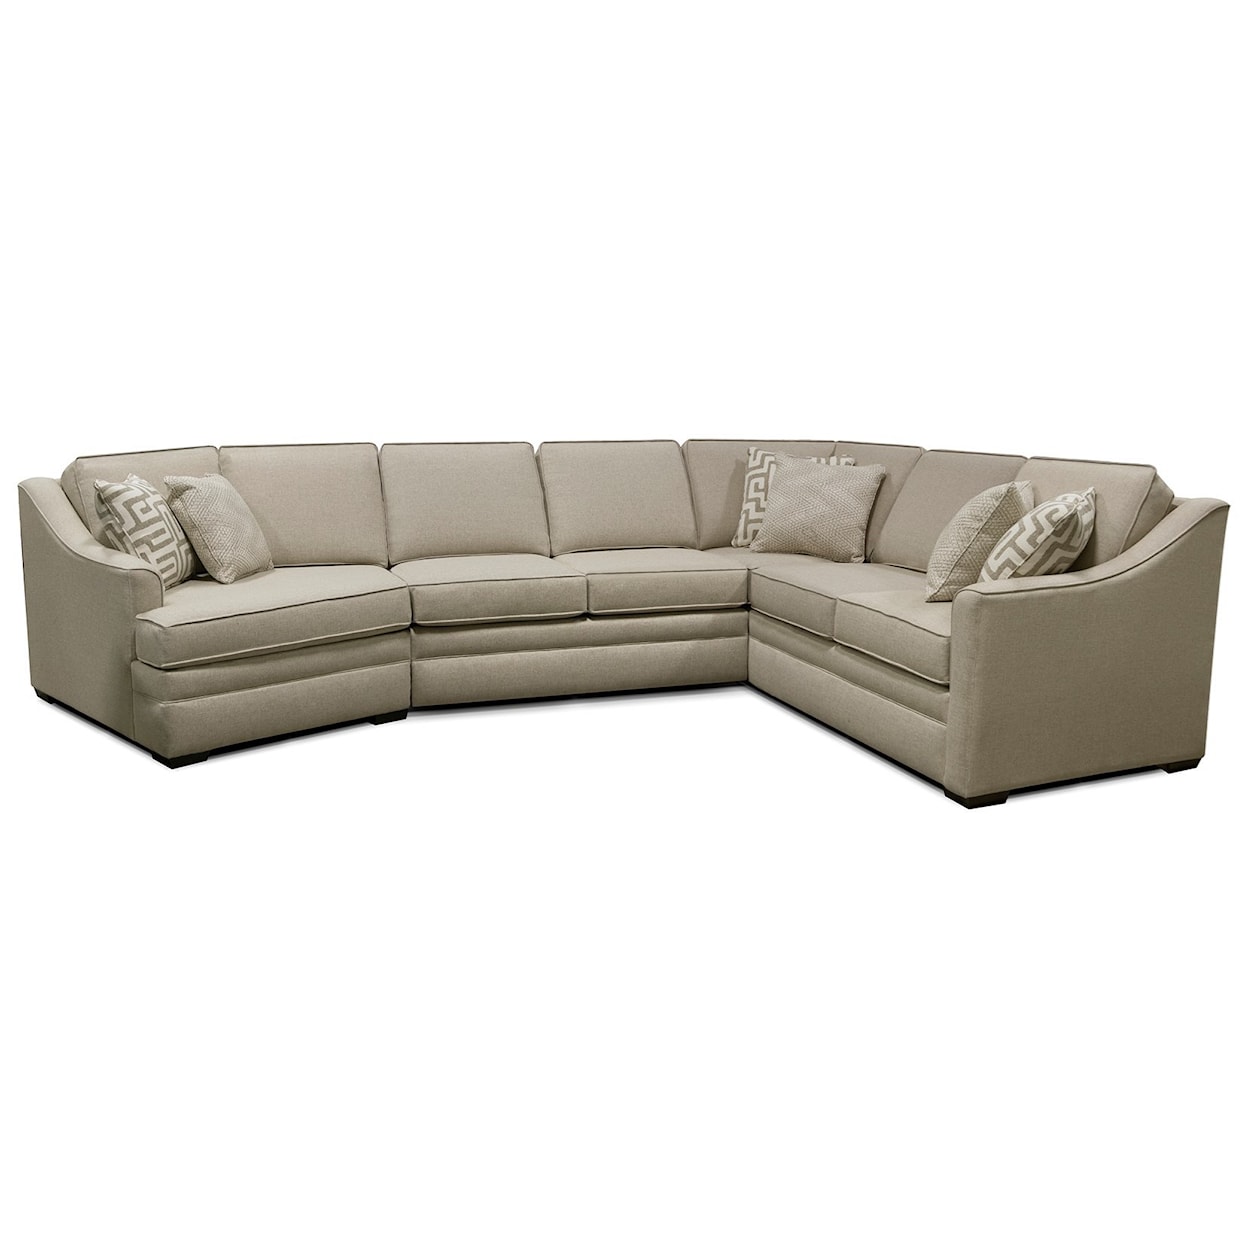 Dimensions 4T00 Series Sectional Sofa with Five Seats